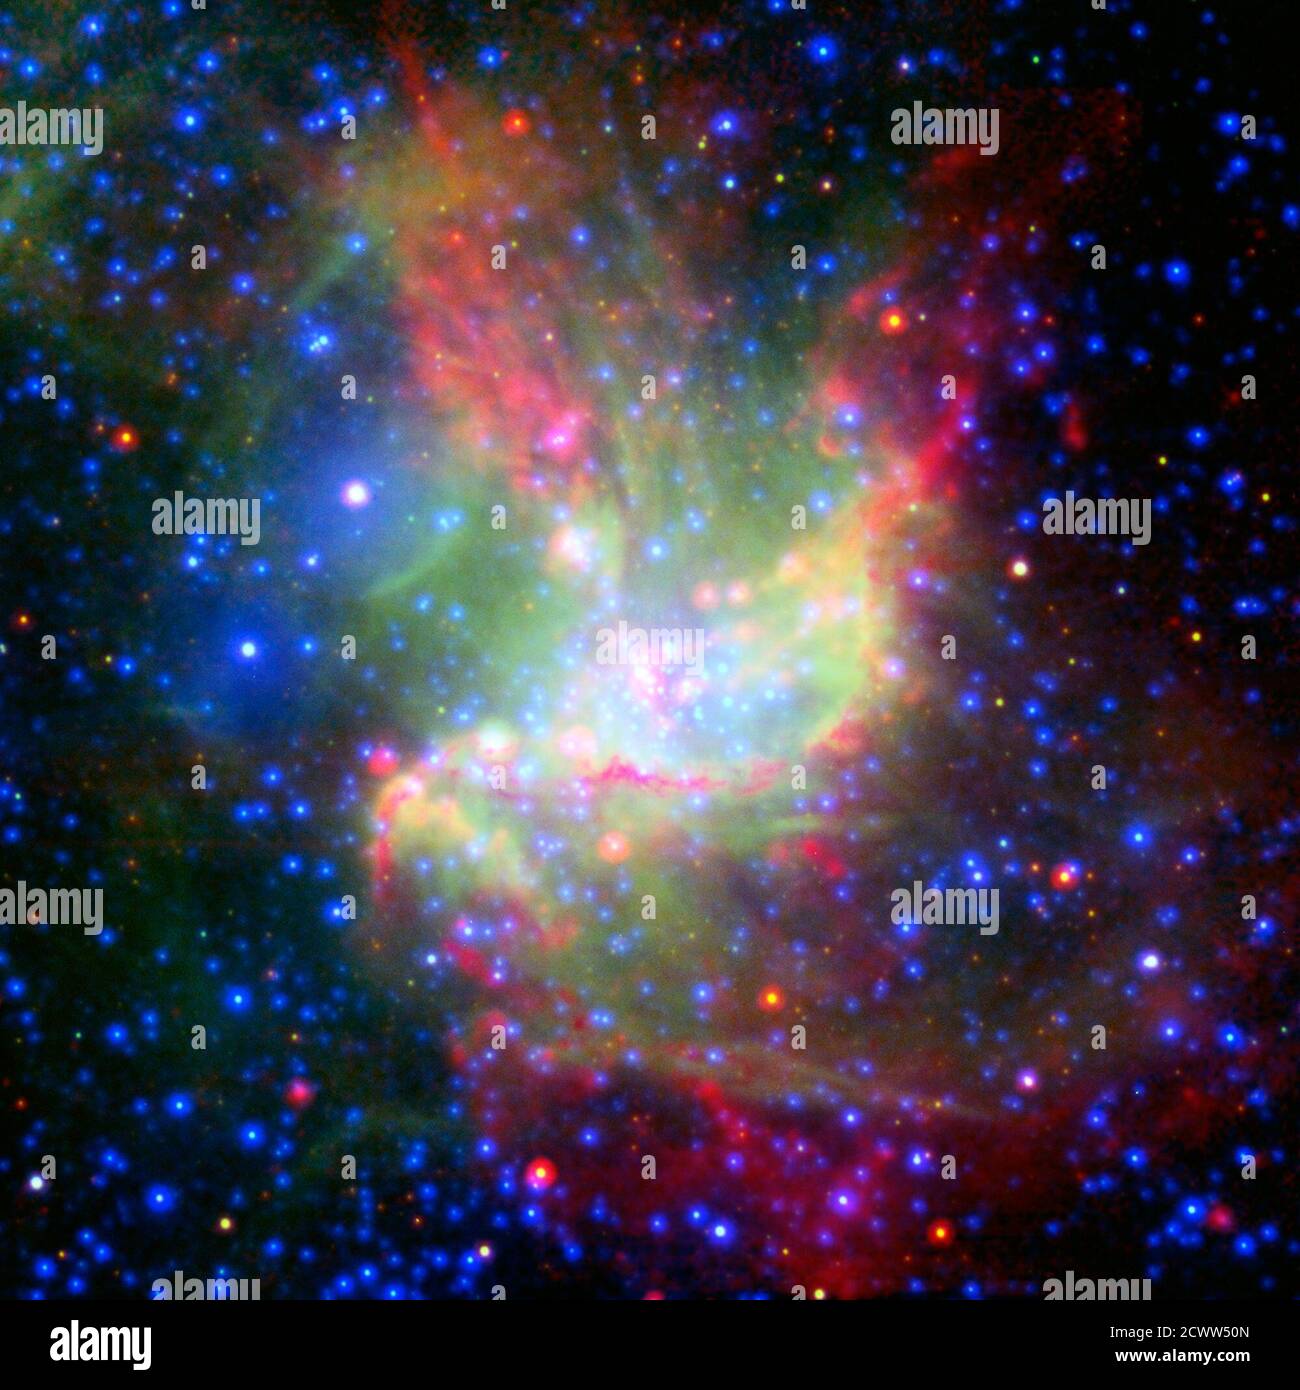 Fledgling Stars in Stellar Nursery The dazzling glow of young stars dominates images of the giant stellar nursery NGC 346, in the neighboring dwarf galaxy called the Small Magellanic Cloud. But this photogenic beauty is more than just a “pretty face.”  This image of the star-forming cloud is a combination of multiwavelength light from NASA's Spitzer Space Telescope (infrared), the European Southern Observatory's New Technology Telescope (visible), and the European Space Agency's XMM-Newton space telescope (X-ray). The James Webb Space Telescope’s sharper infrared vision will allow astronomers Stock Photo